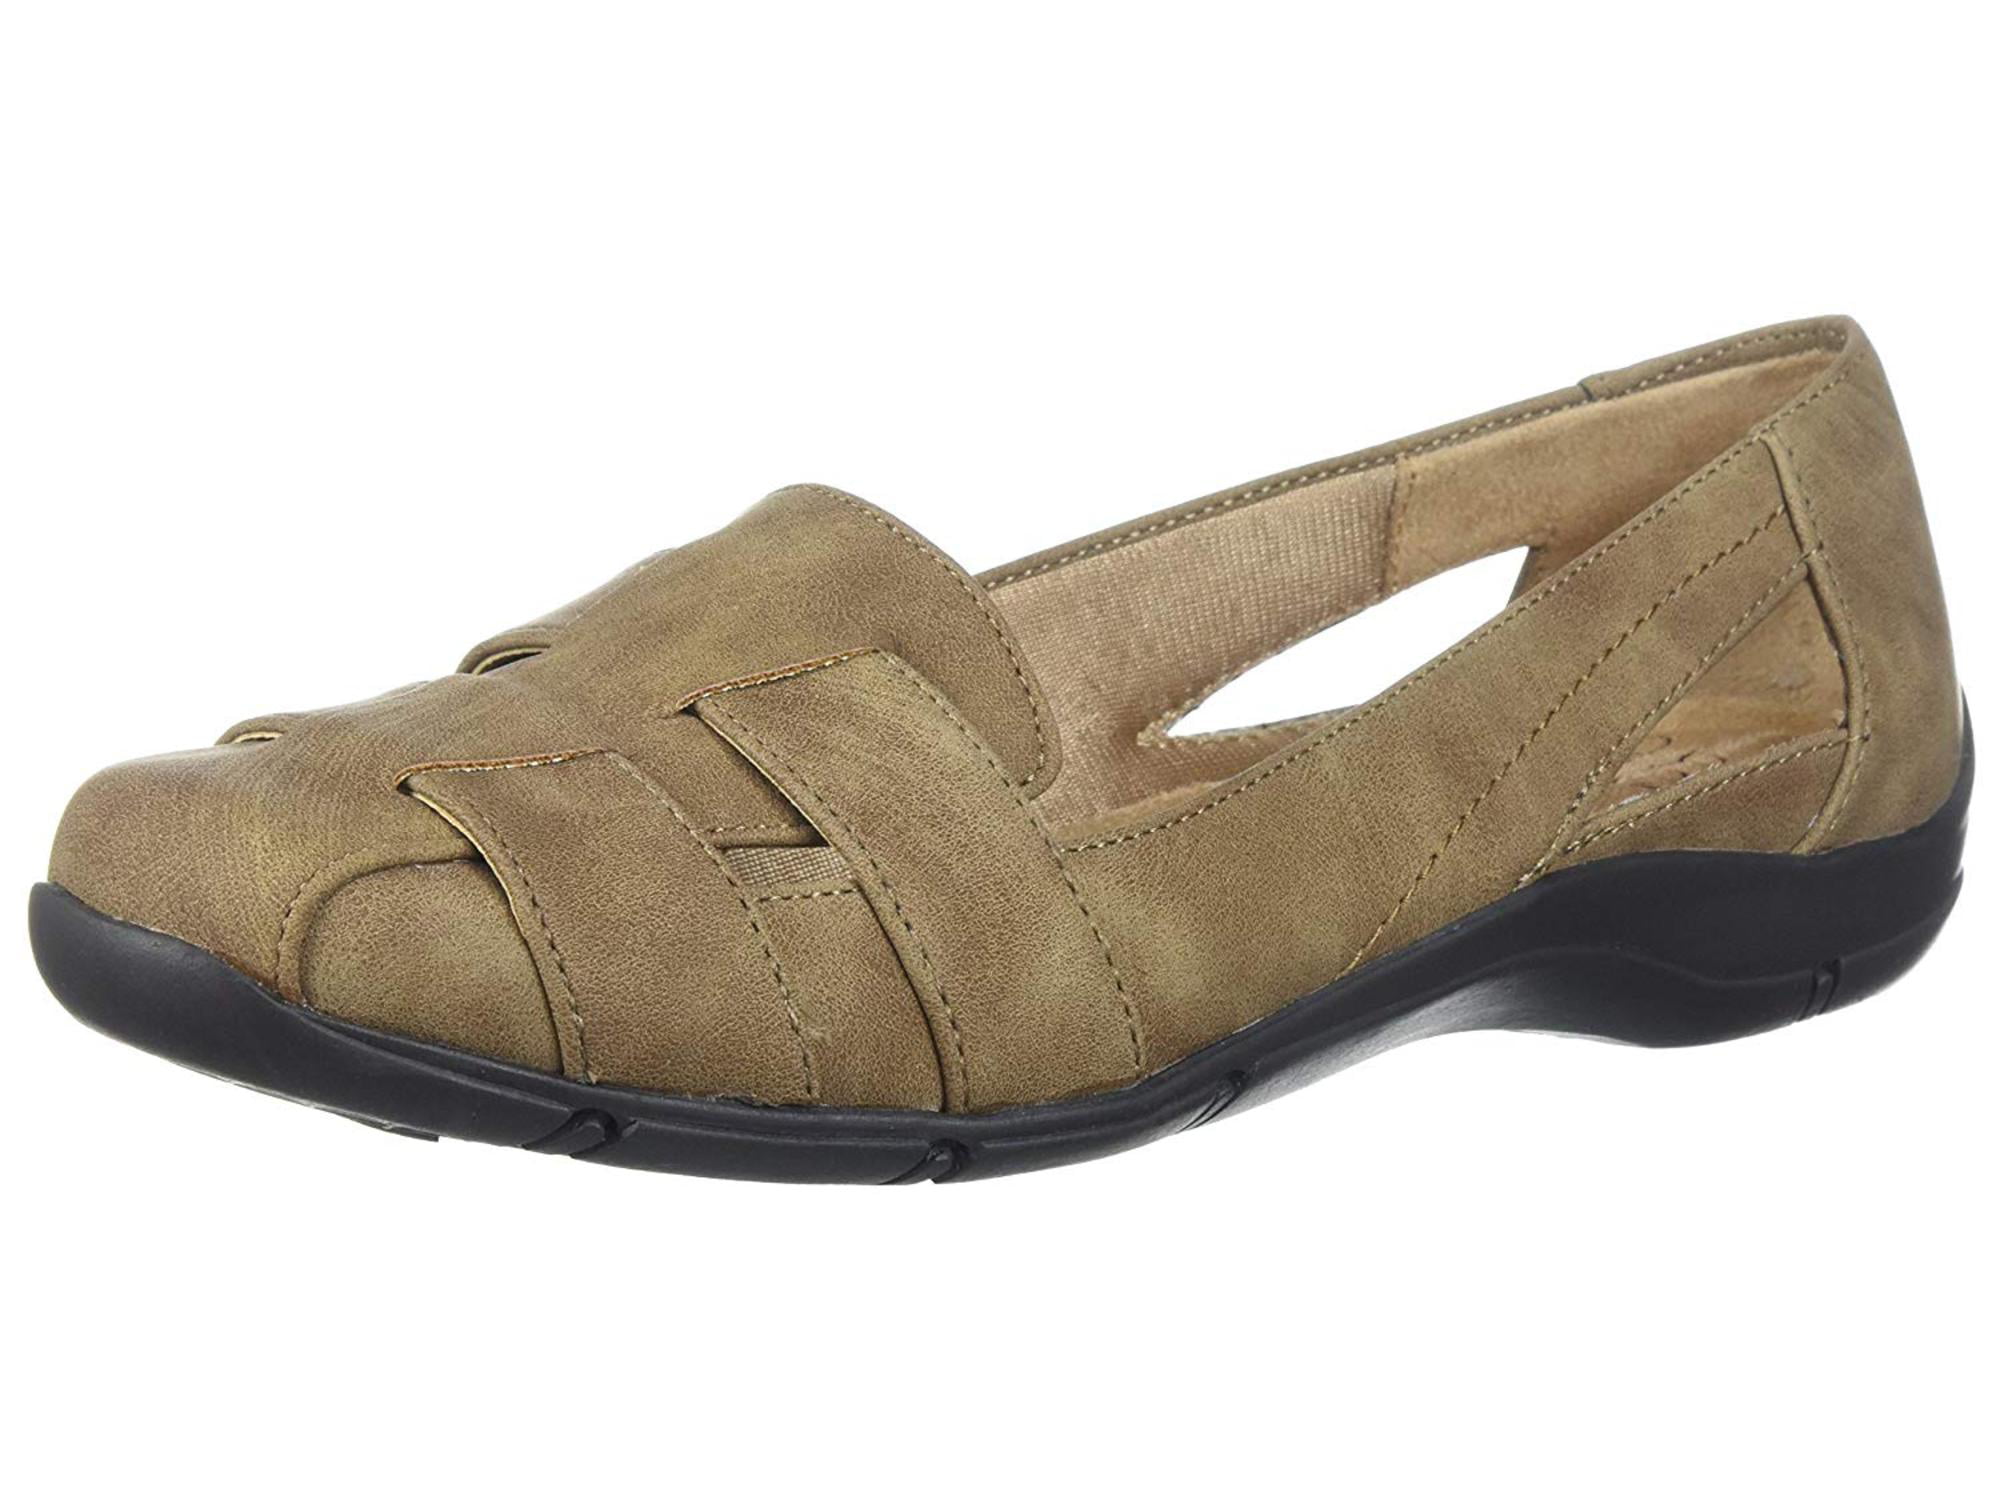 LifeStride - Lifestride Womens Dee Suede Closed Toe Loafers, Tan, Size ...